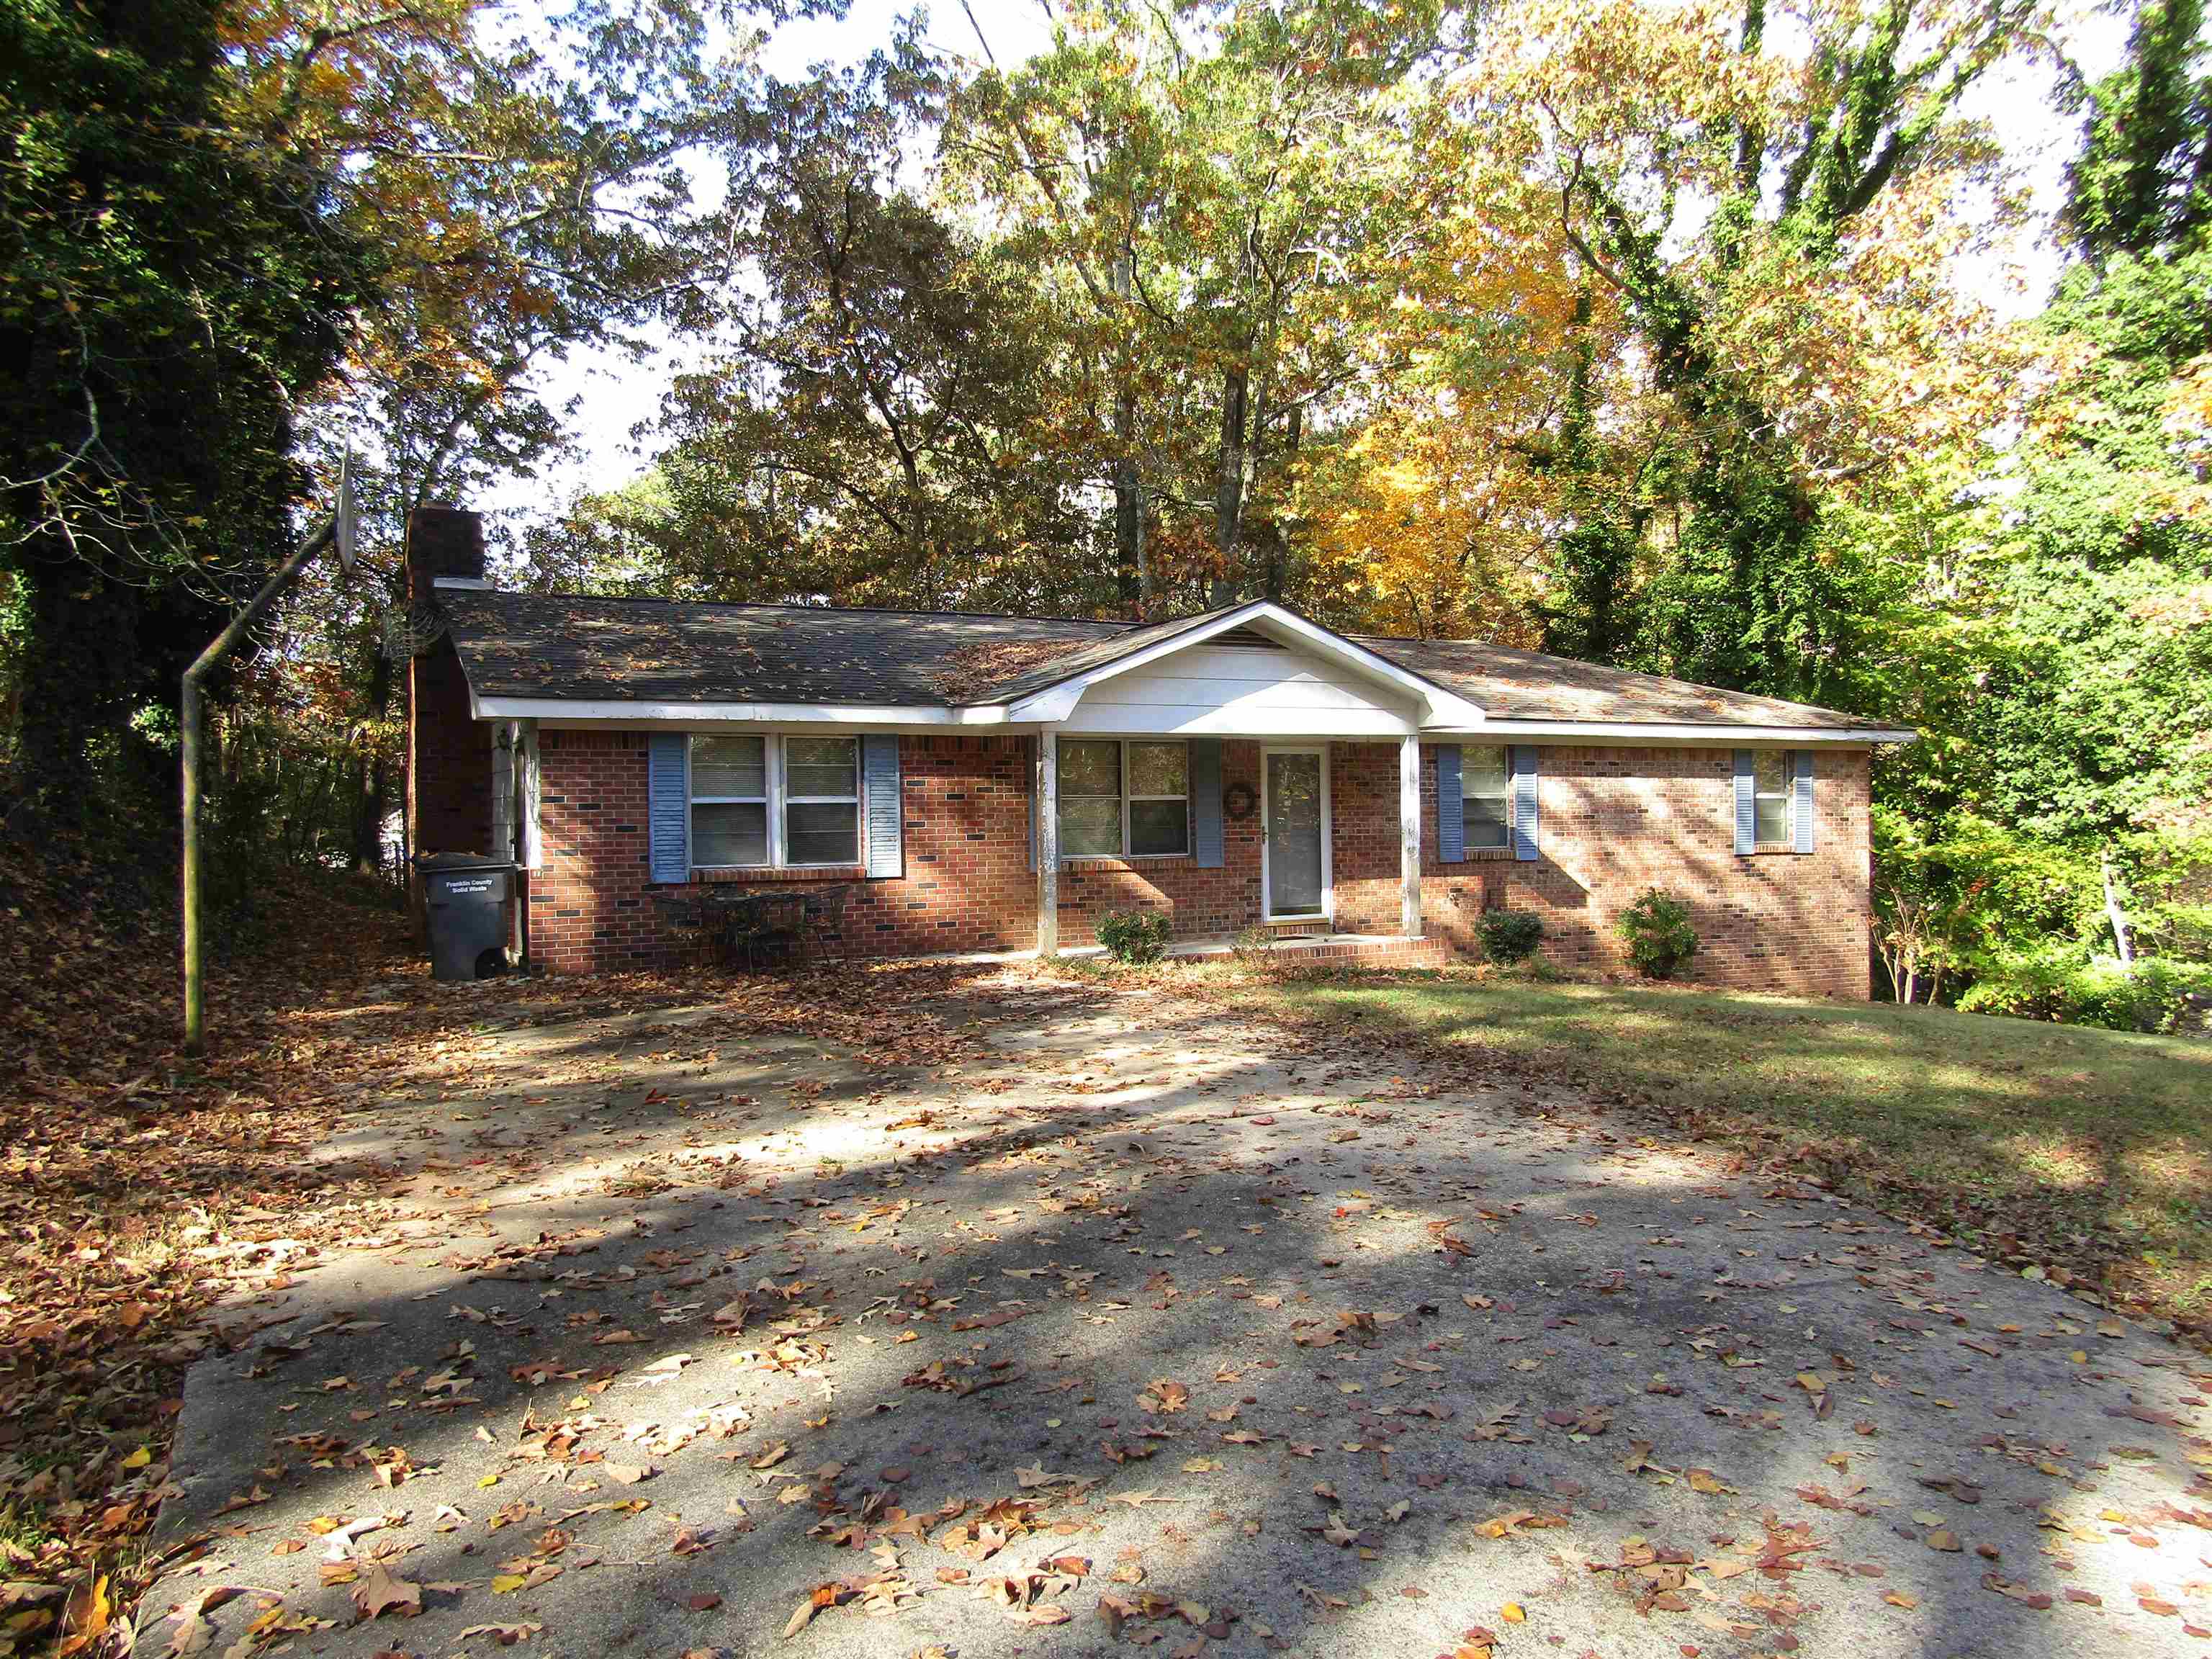 Great location!! Only blocks from Russellville Schools.  Great starter home.. 3 bedroom 1.5 bath brick rancher.  Carport has been enclosed for another living area with beautiful brick fireplace and inside laundry.  New deck has been built so you can enjoy the private backyard.  With just a little TLC, you can make it your own!